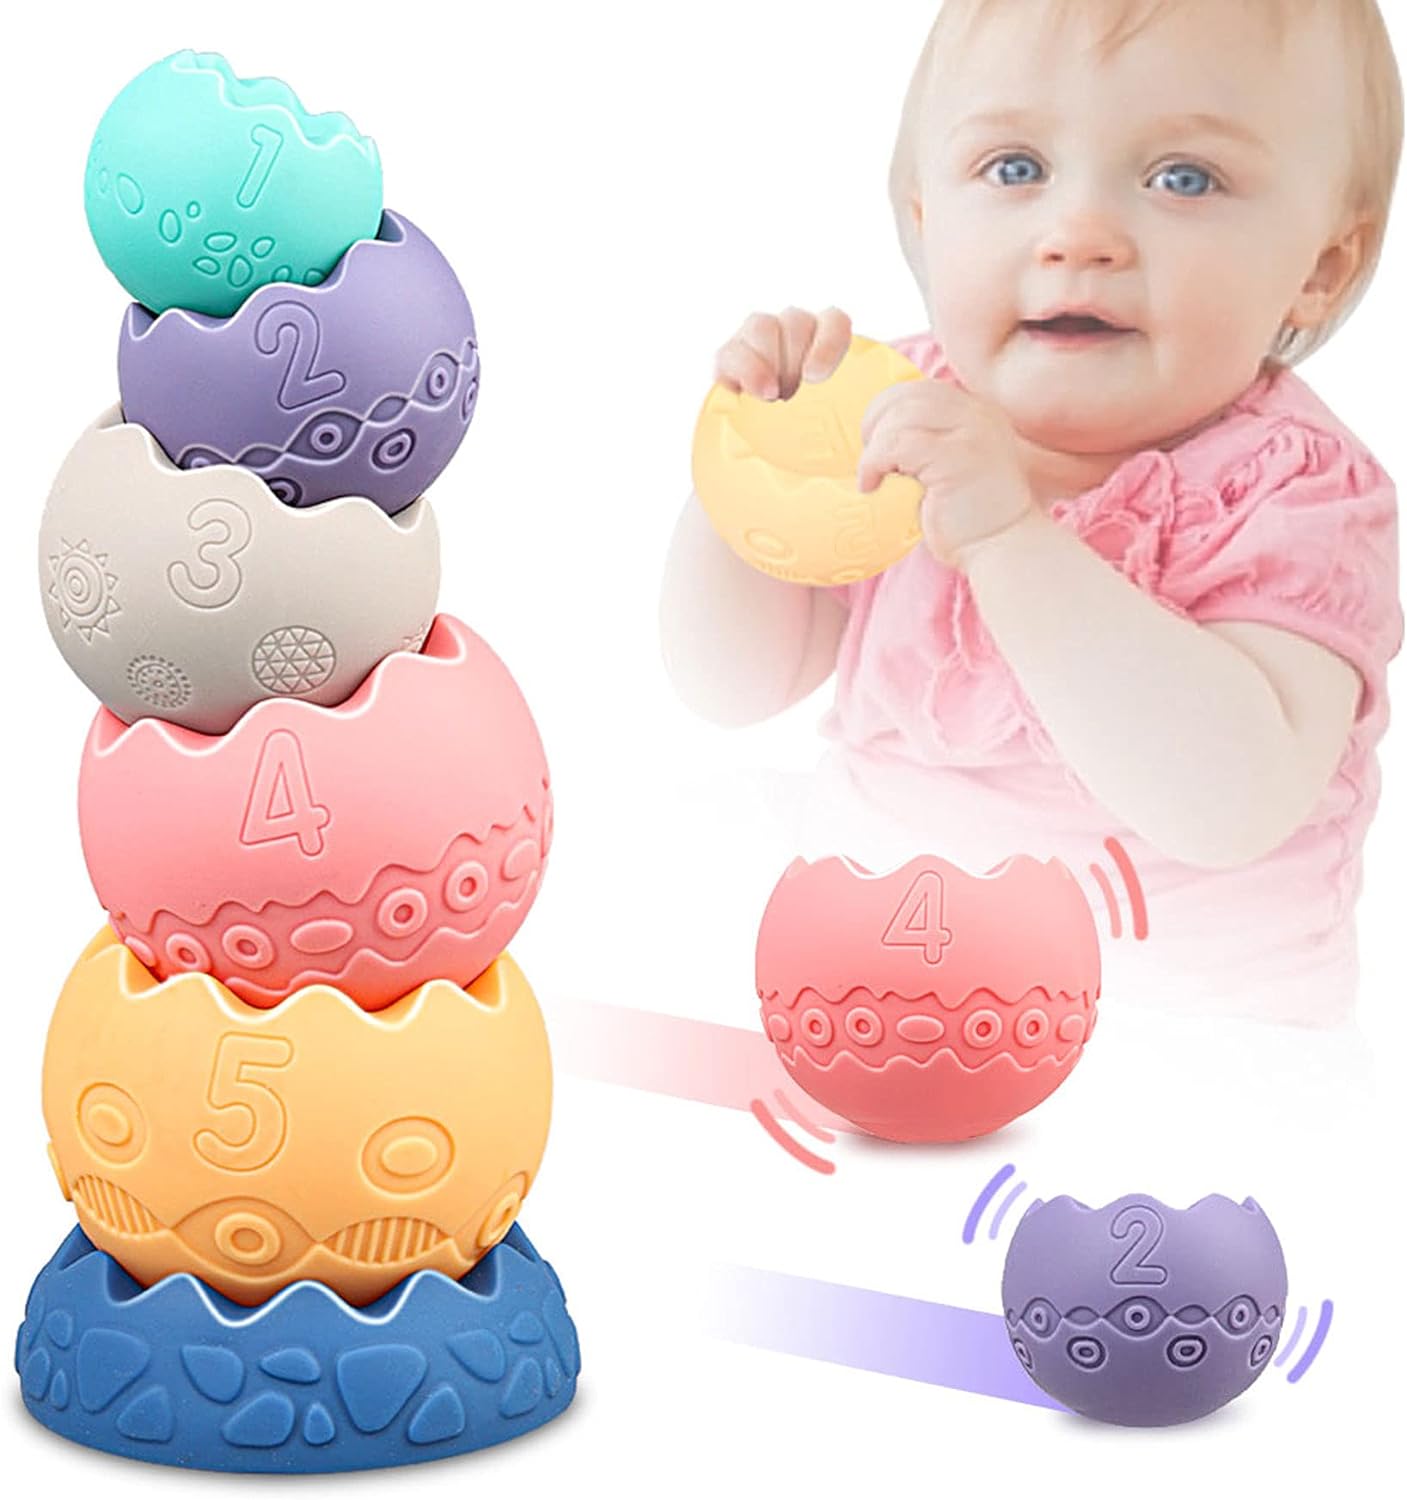 The Benefits of Baby Silicone Stacking Toy Blocks: A Must-Have for Your Little One